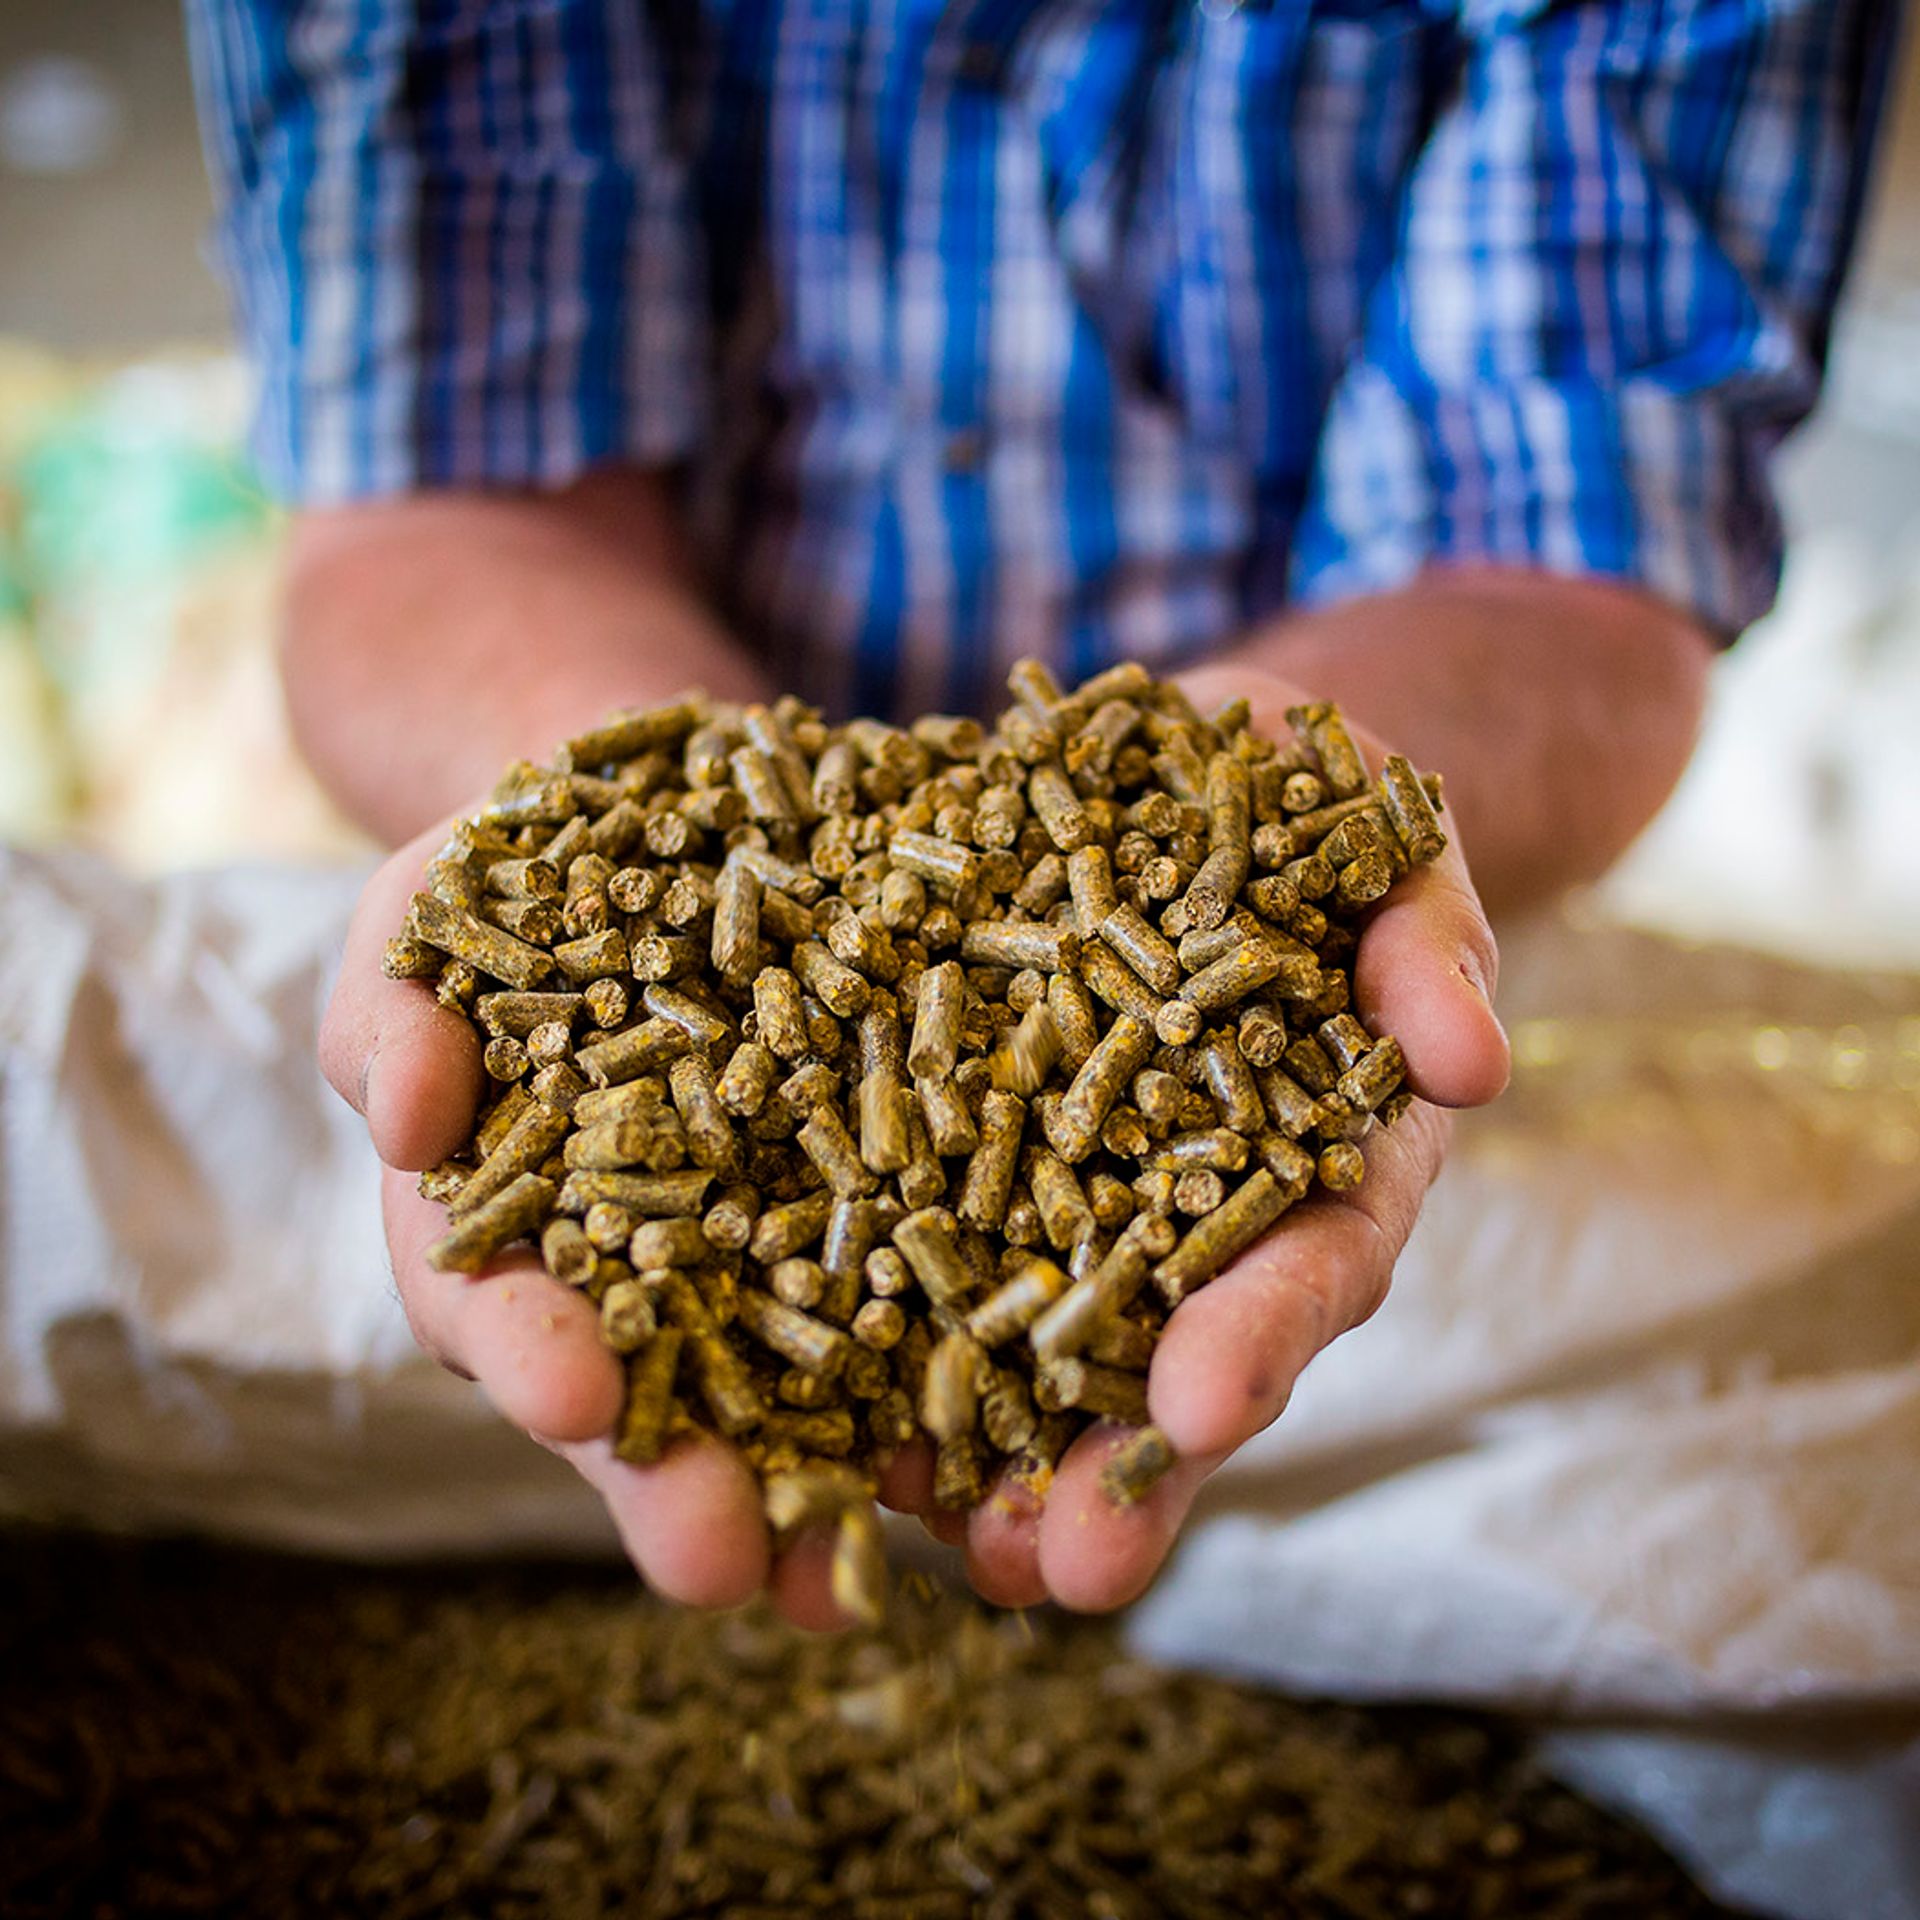 Image of a compound feed manufacturer holding a sample of finished feed